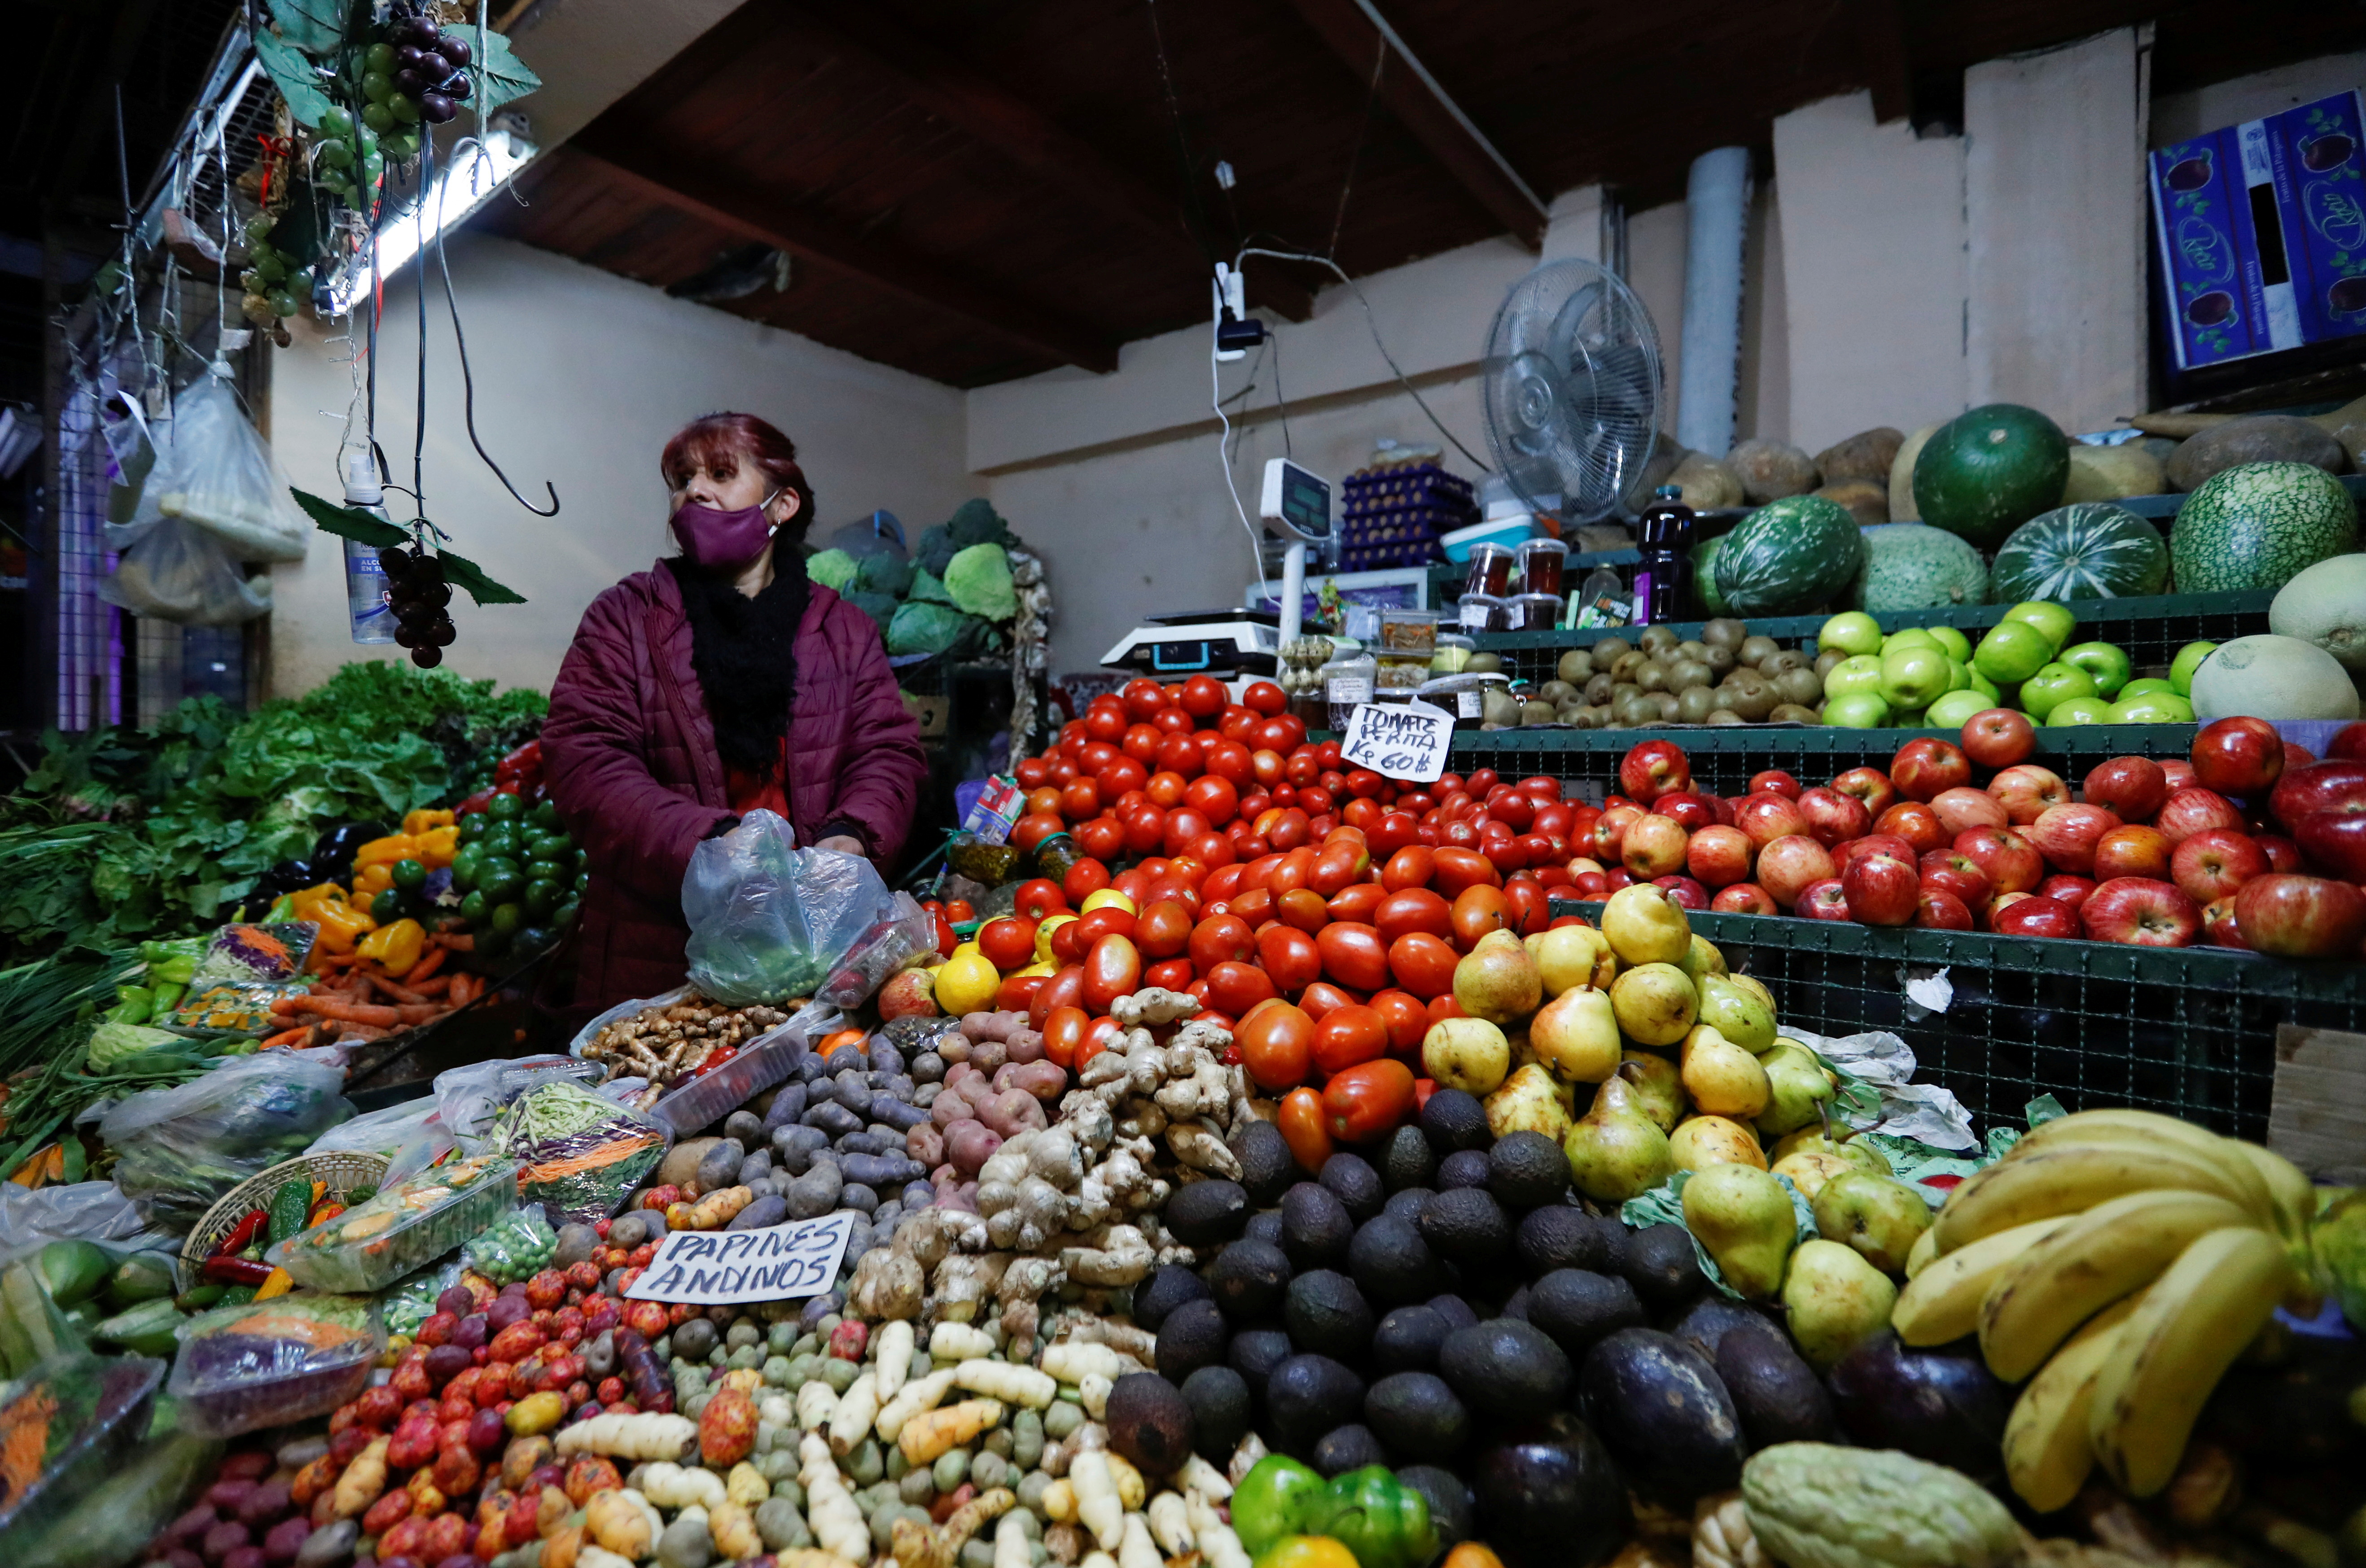 A vegetable seller looks on as she waits for customers at a market in Salta, Argentina August 11, 2021. Picture taken August 11, 2021. REUTERS/Agustin Marcarian/File Photo